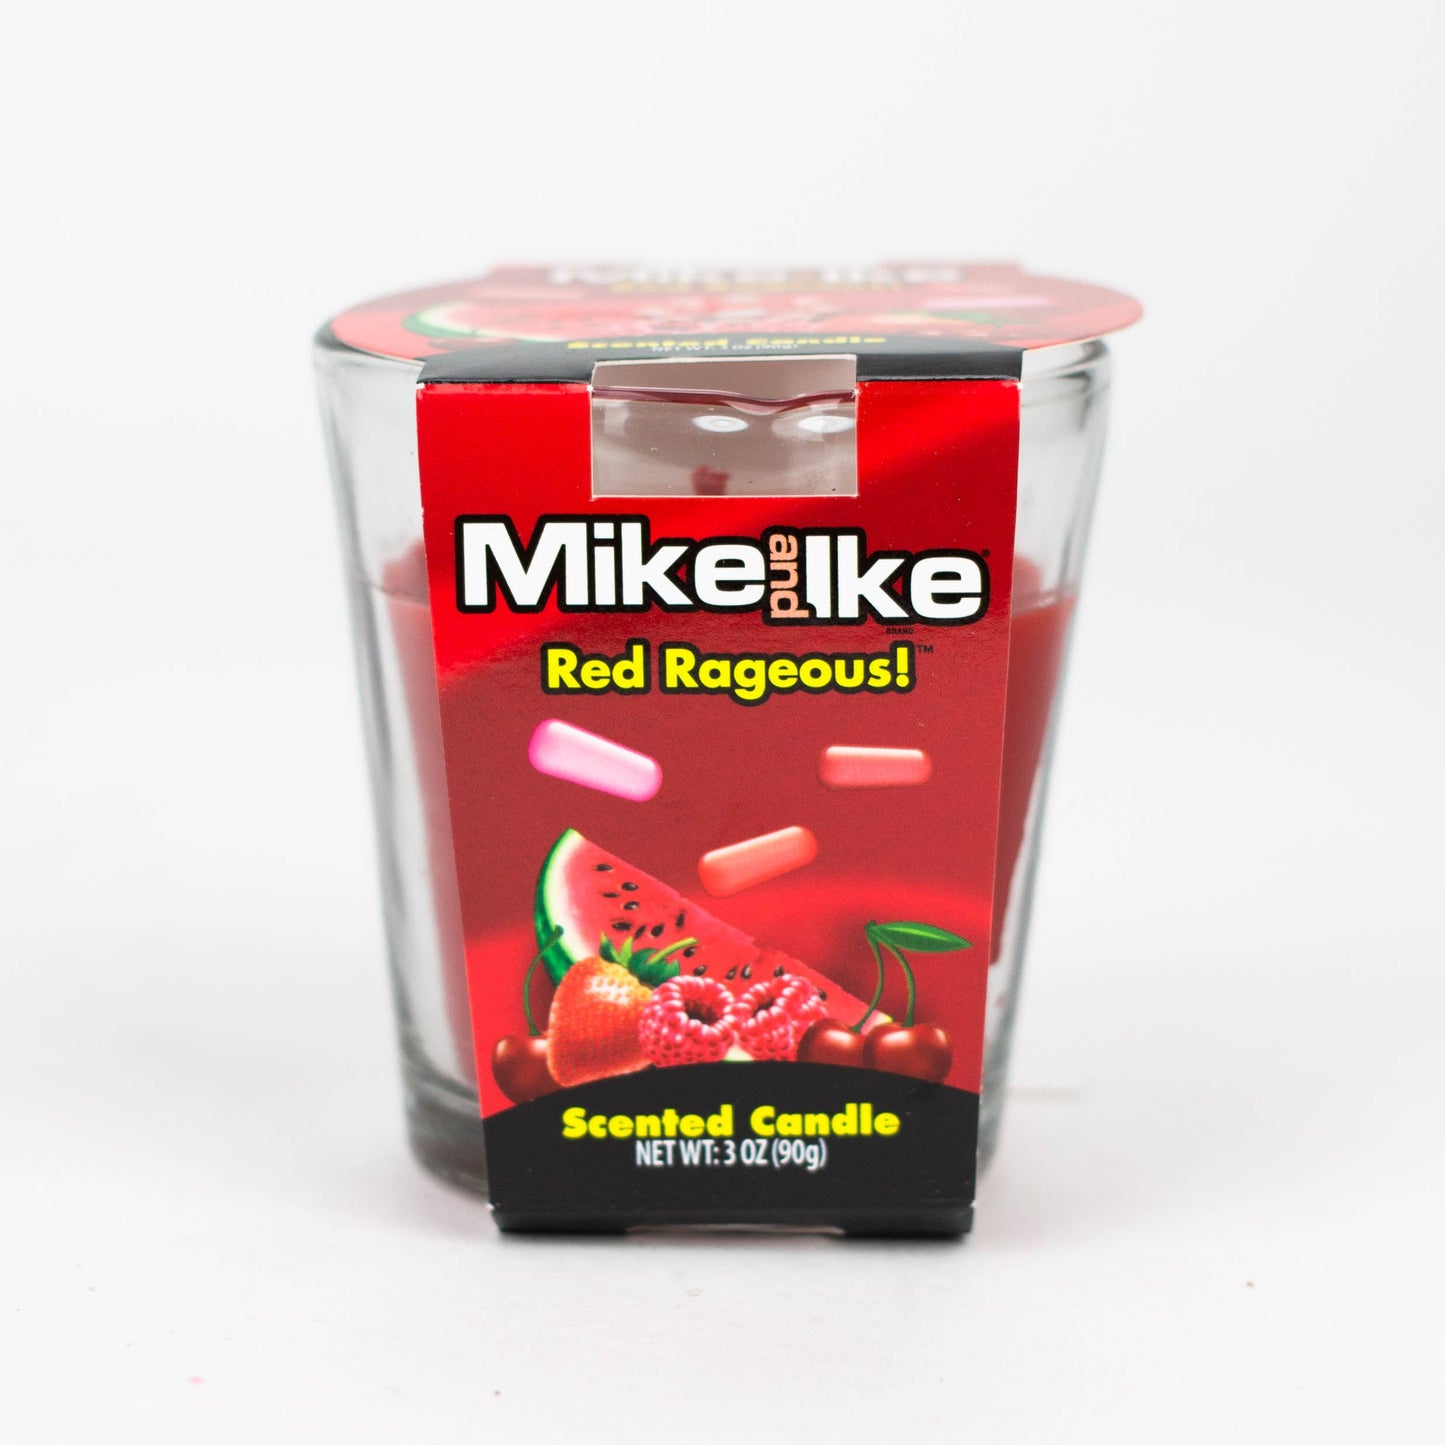 Mike and Ike Scented Candle_3